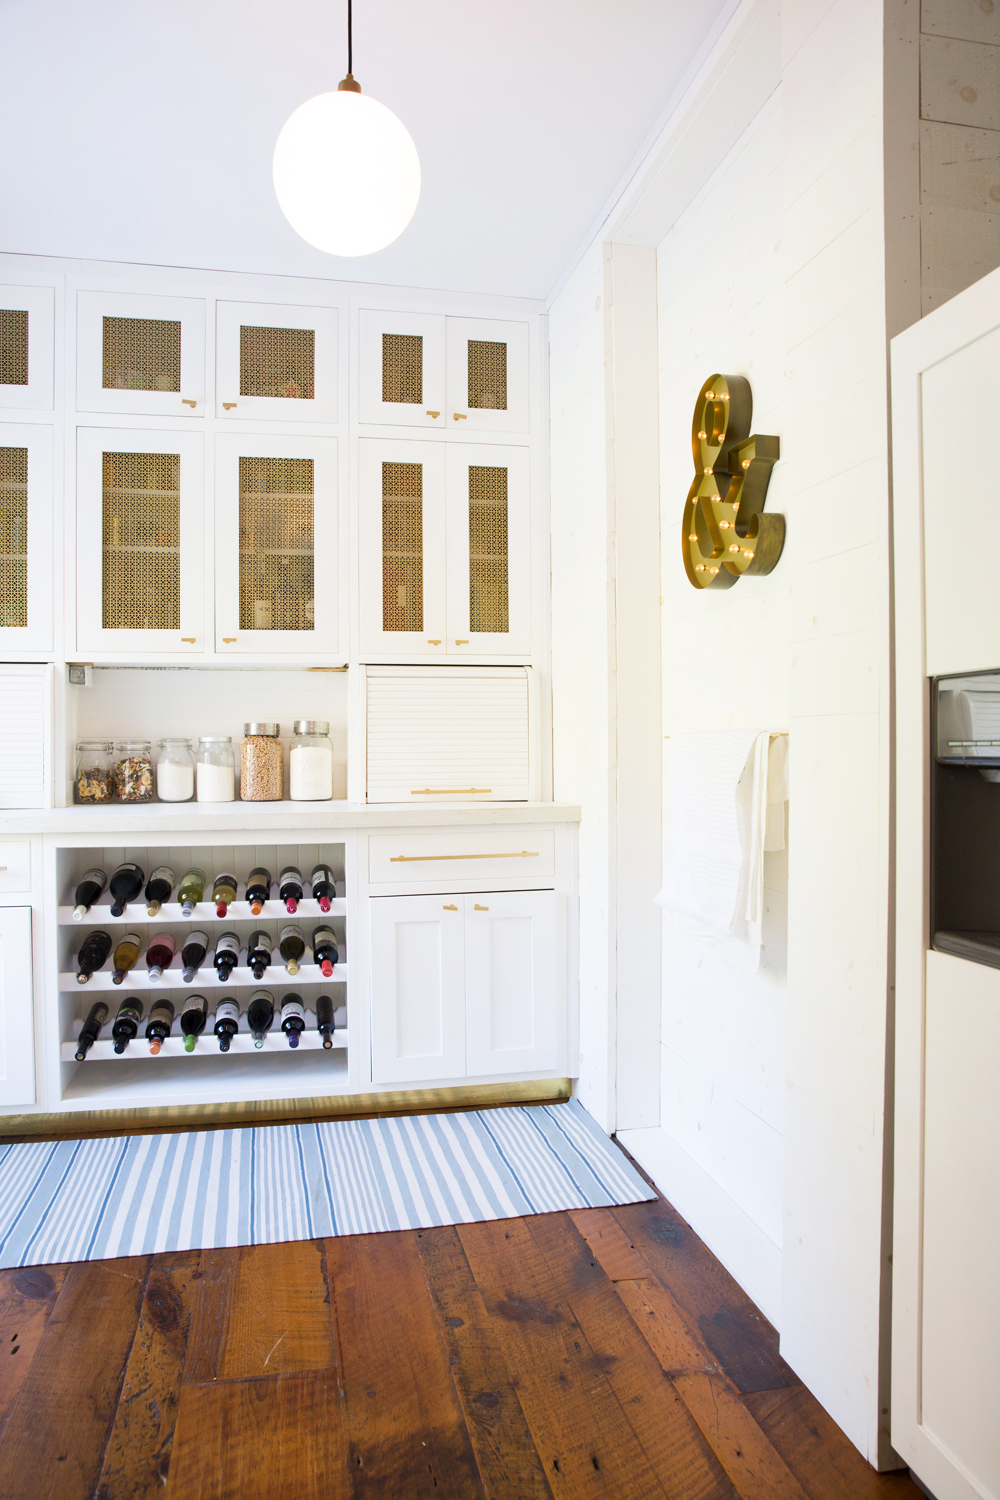 A small walk-in pantry/cantina combination with storage space and wine rack